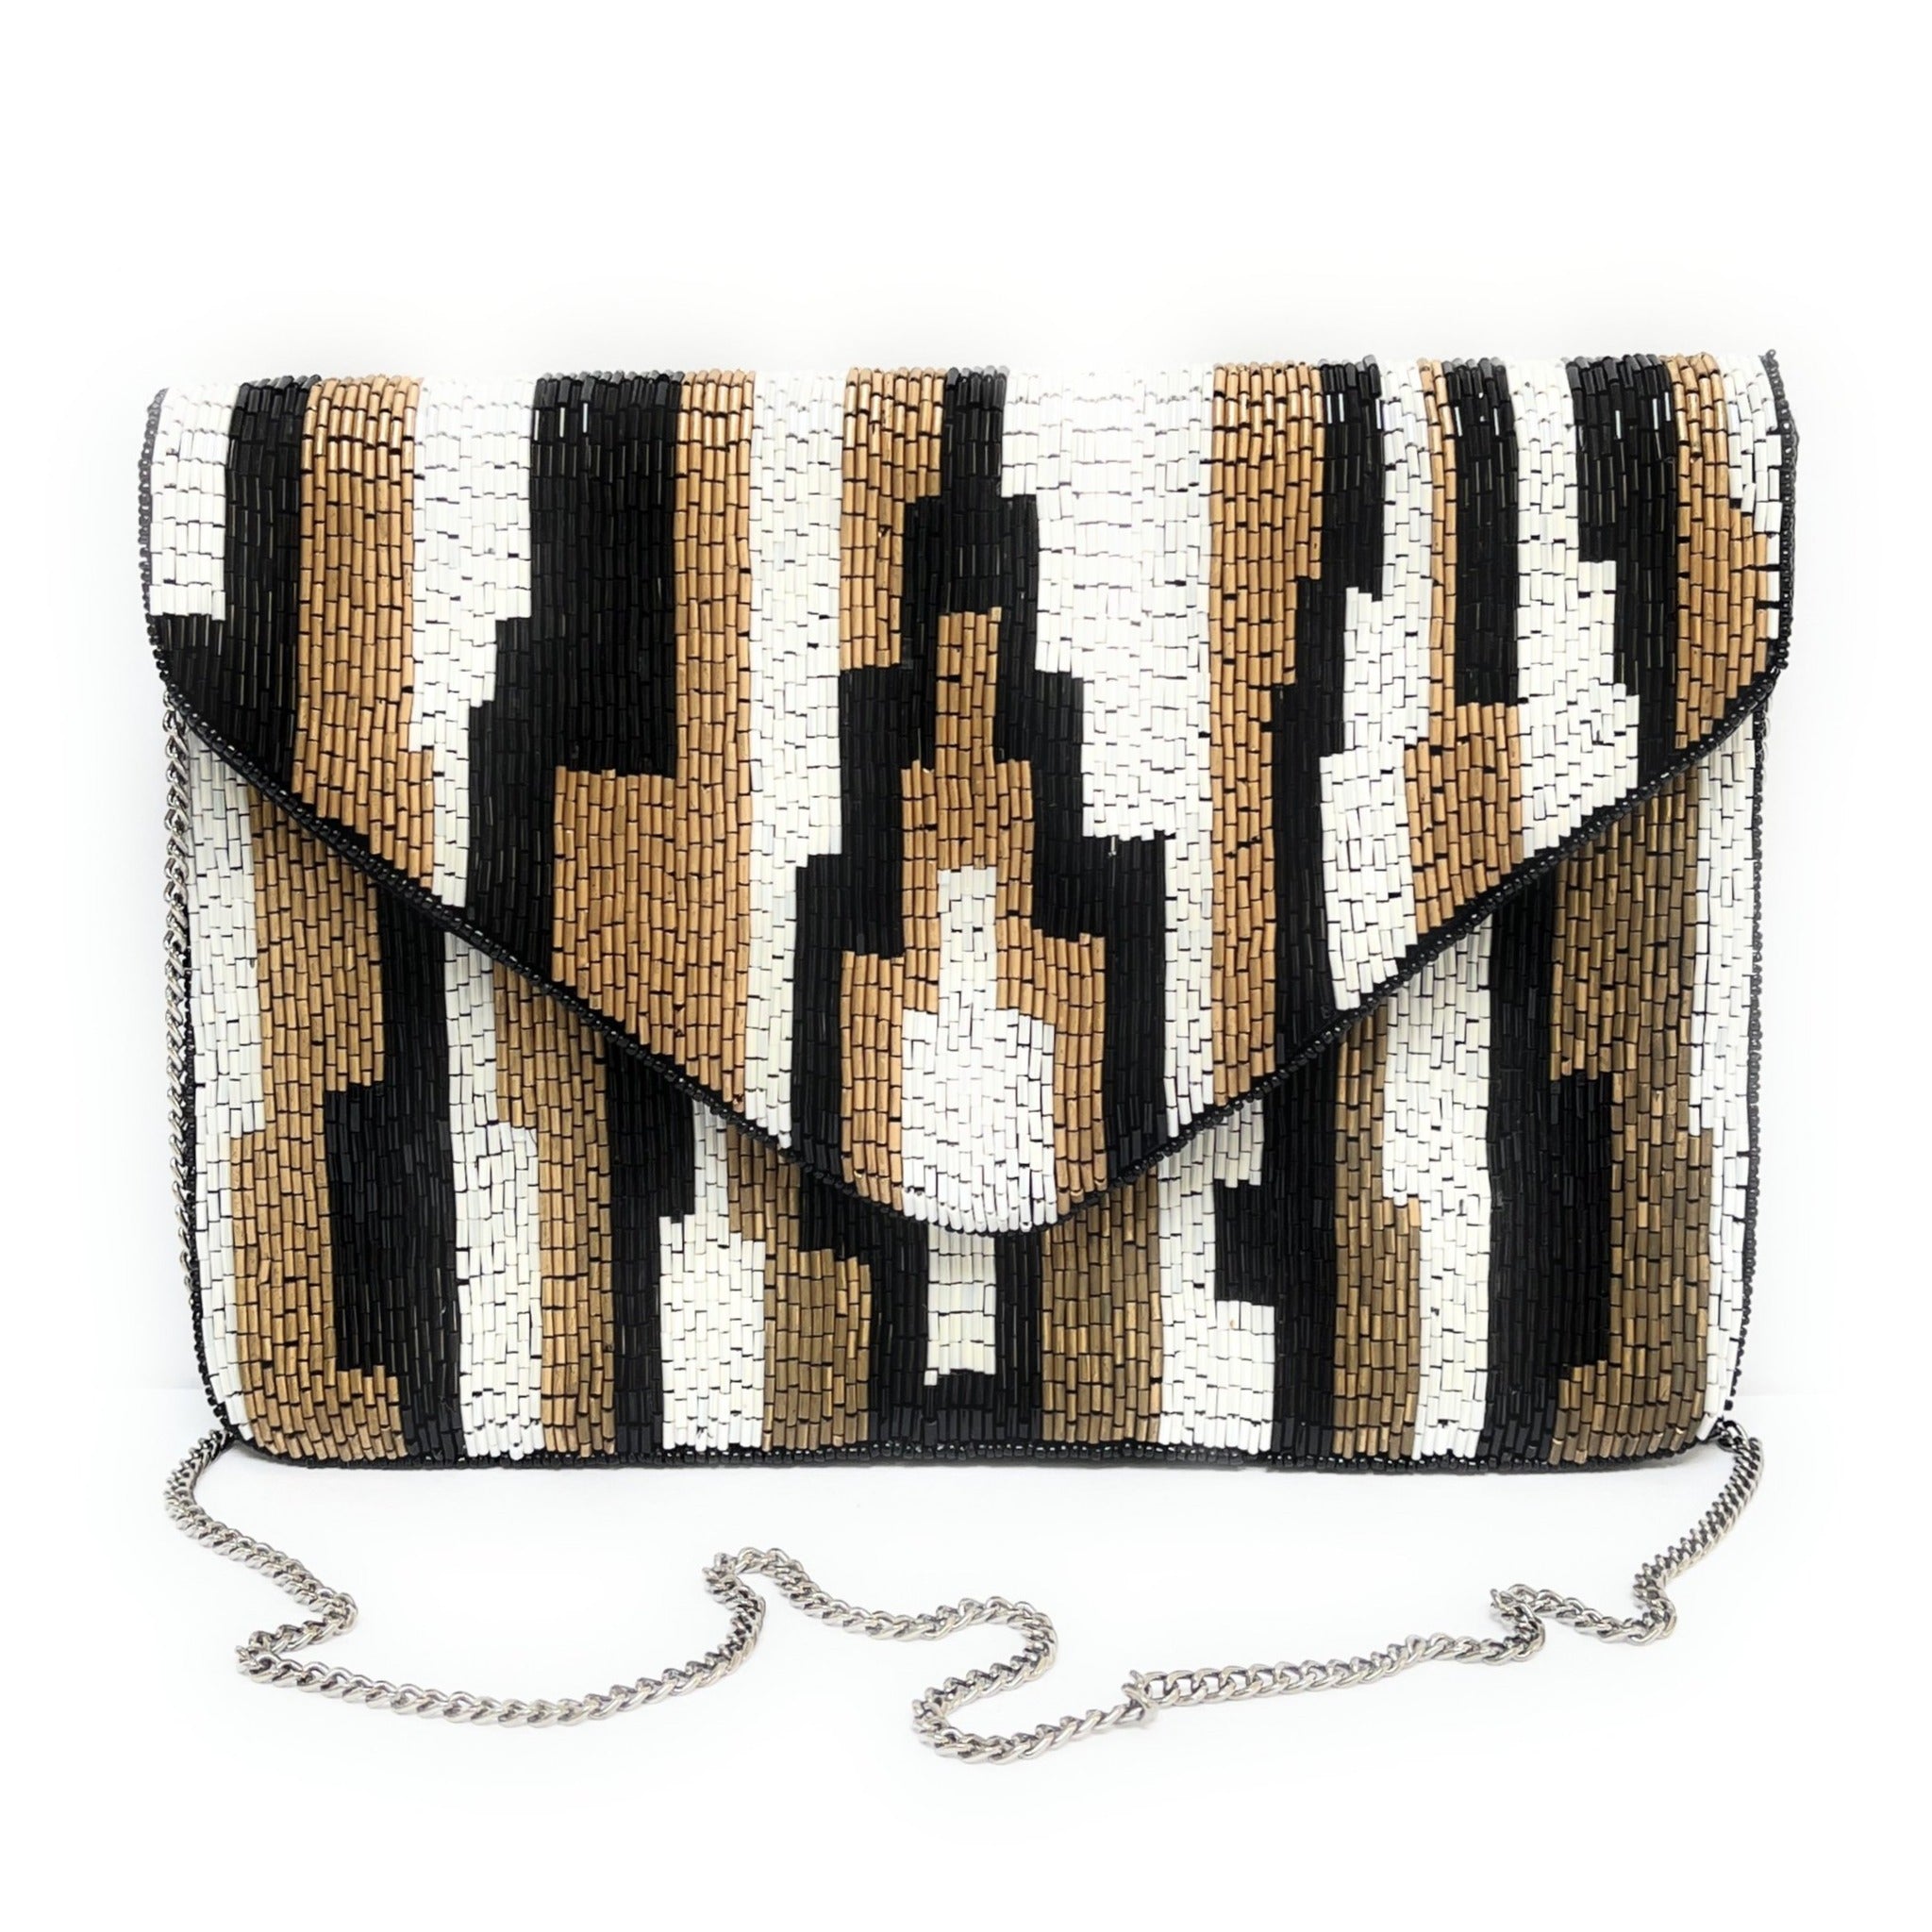 Shop Stylish Clutches For Women At Best Prices Online